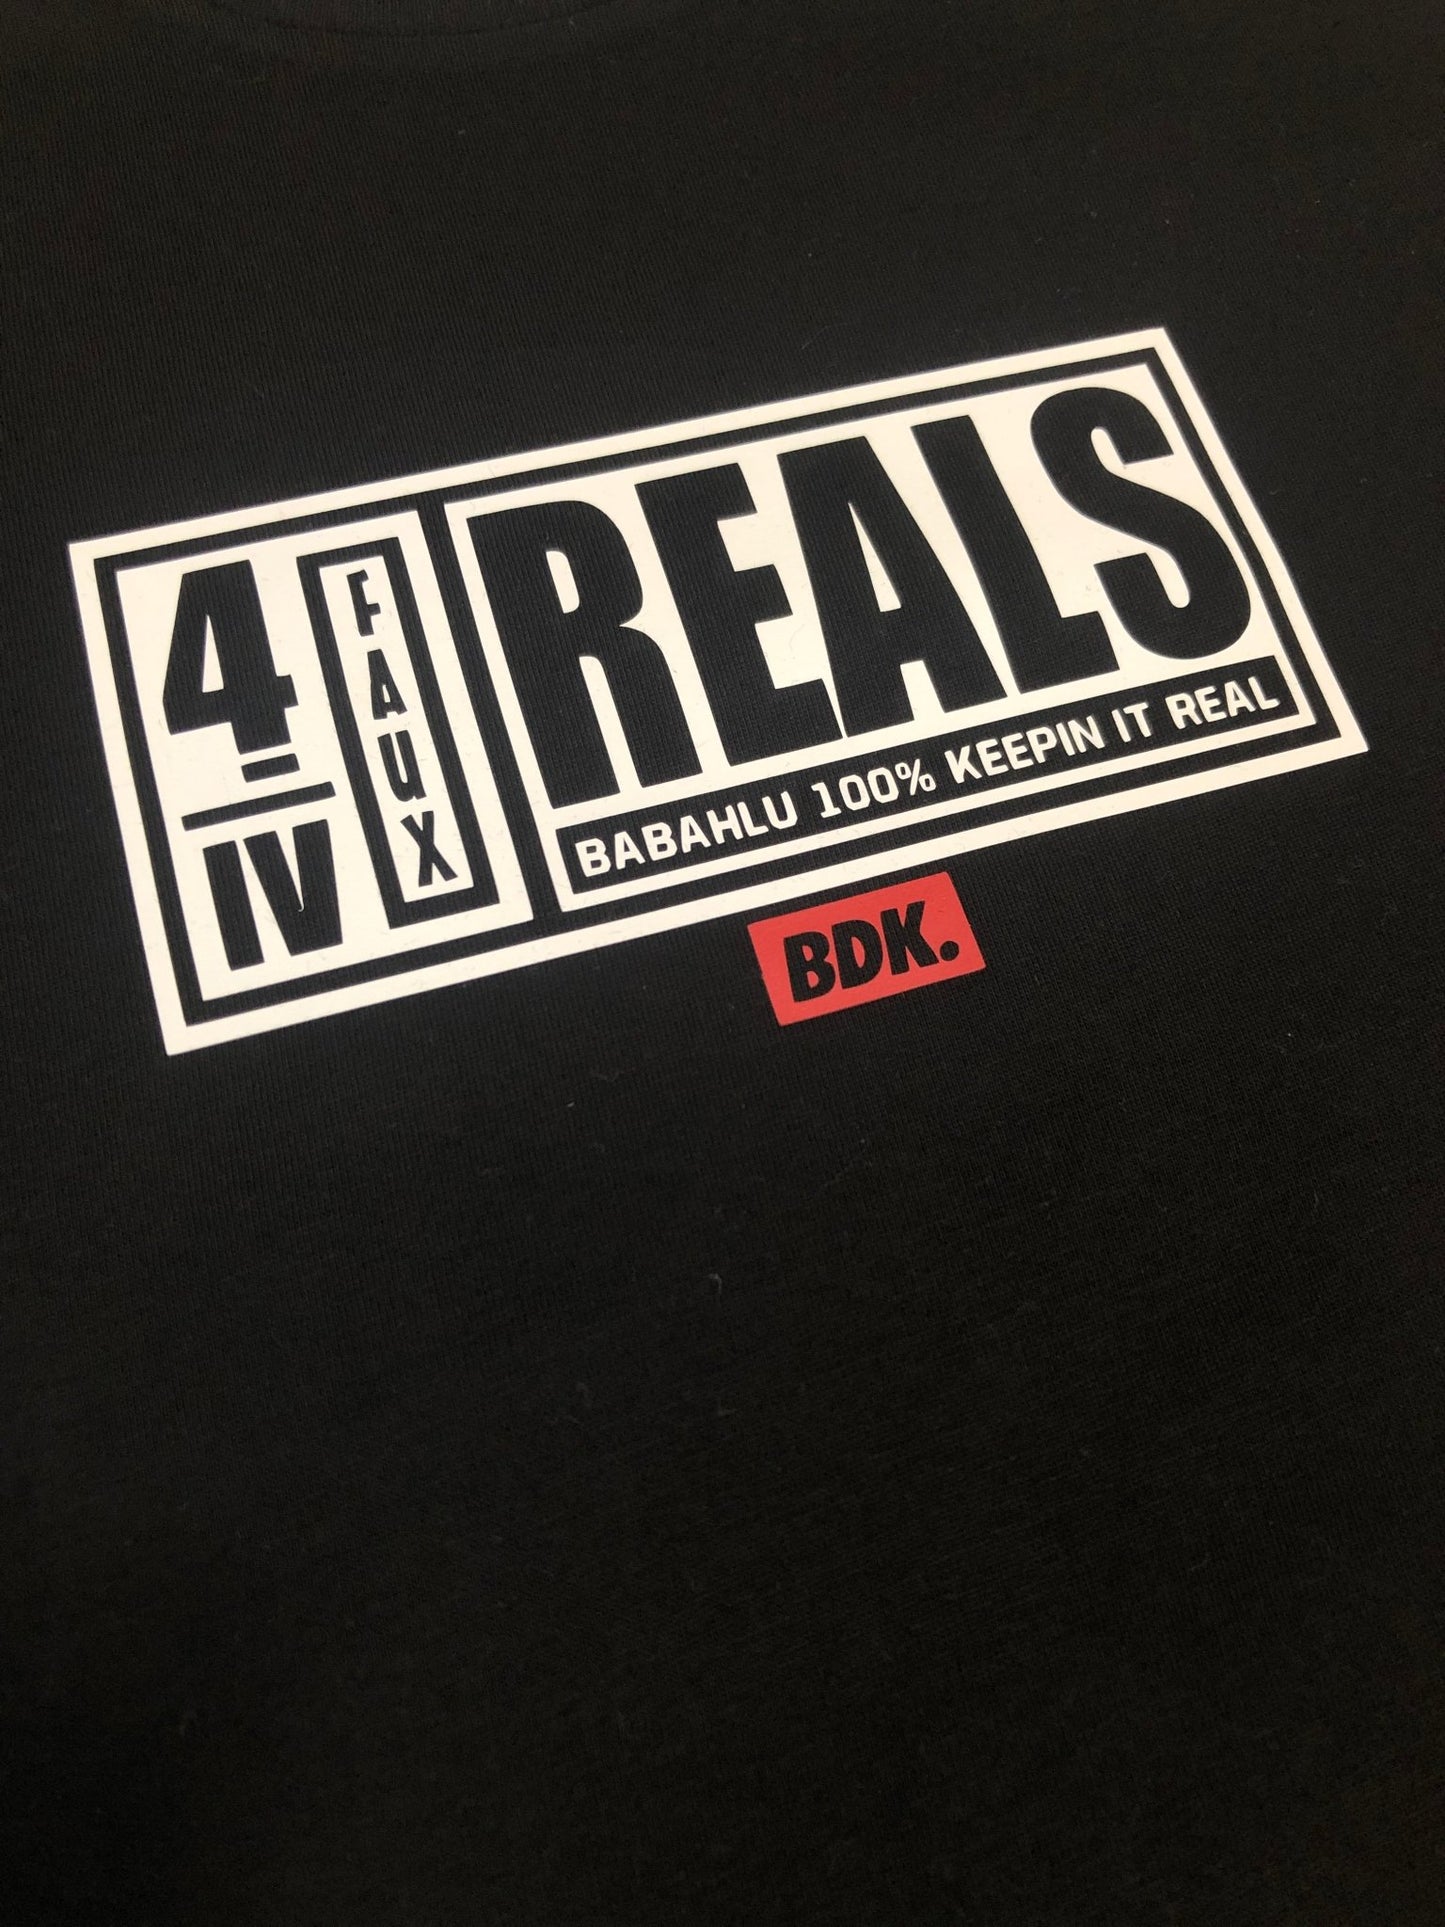 "For Reals" T Shirt - Babahlu Kids